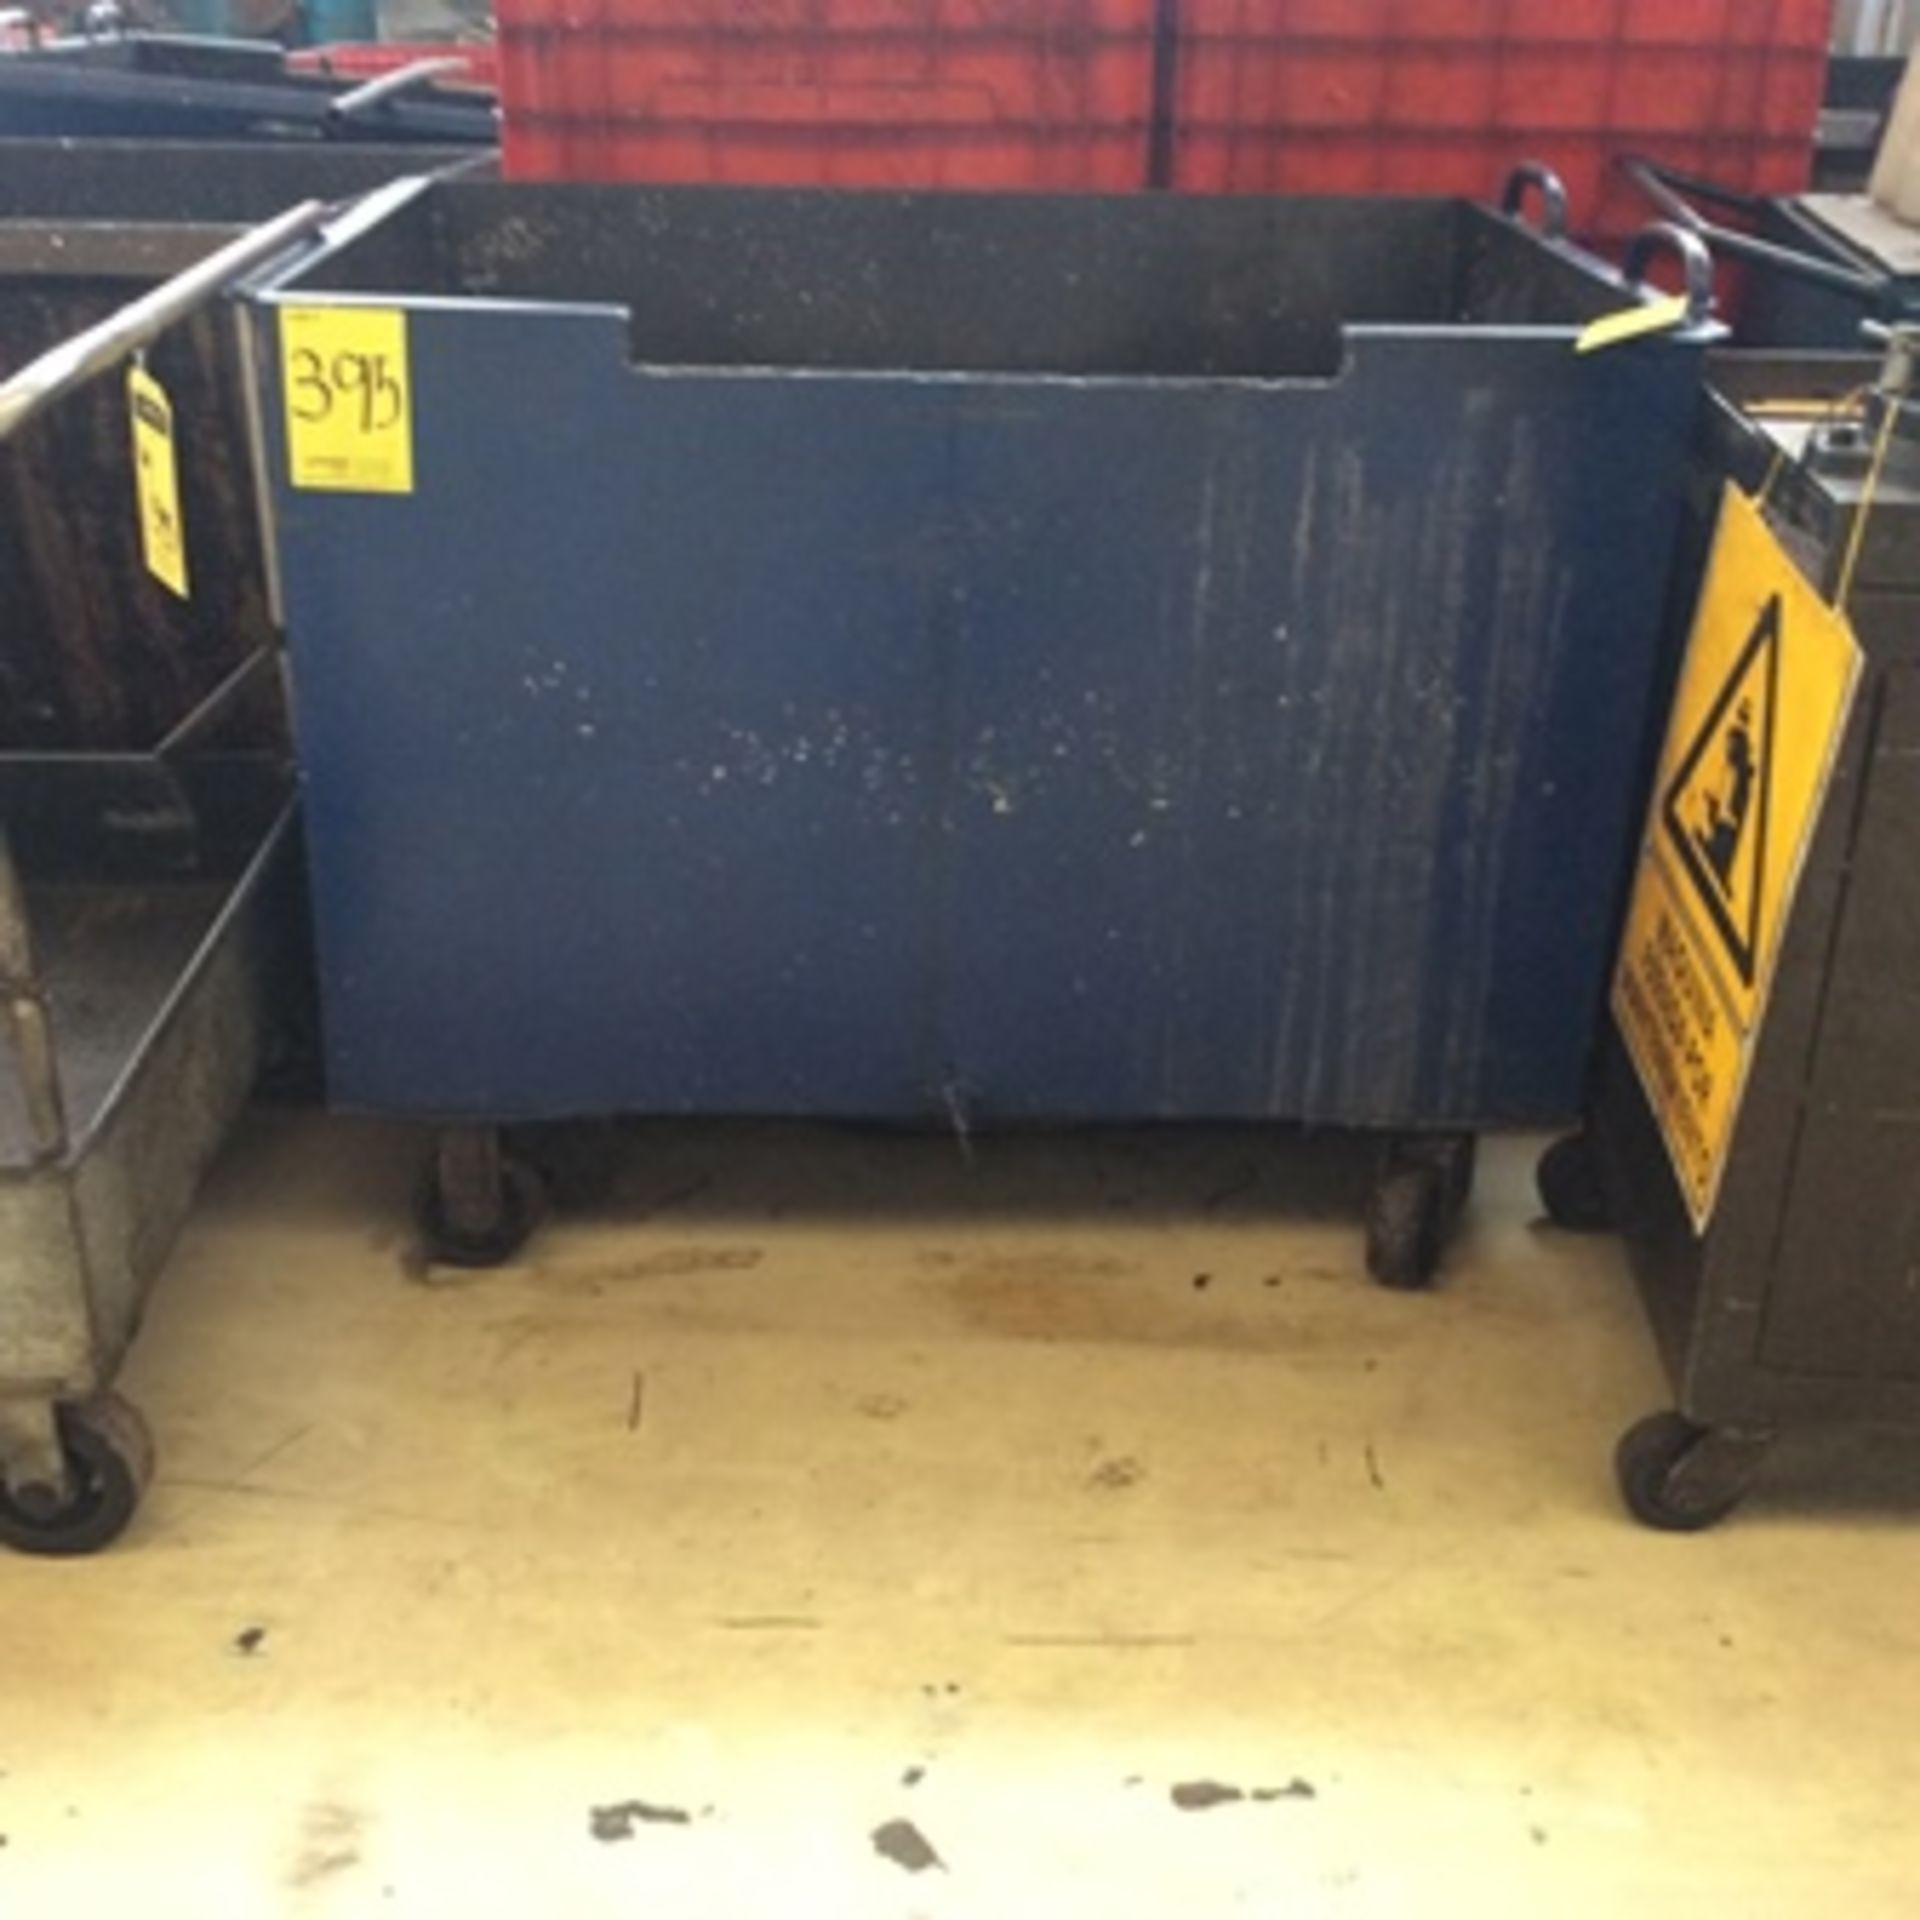 8 Trolleys for pickup and 2 tool trolleys with vise number 6 and 4 … - Image 20 of 20